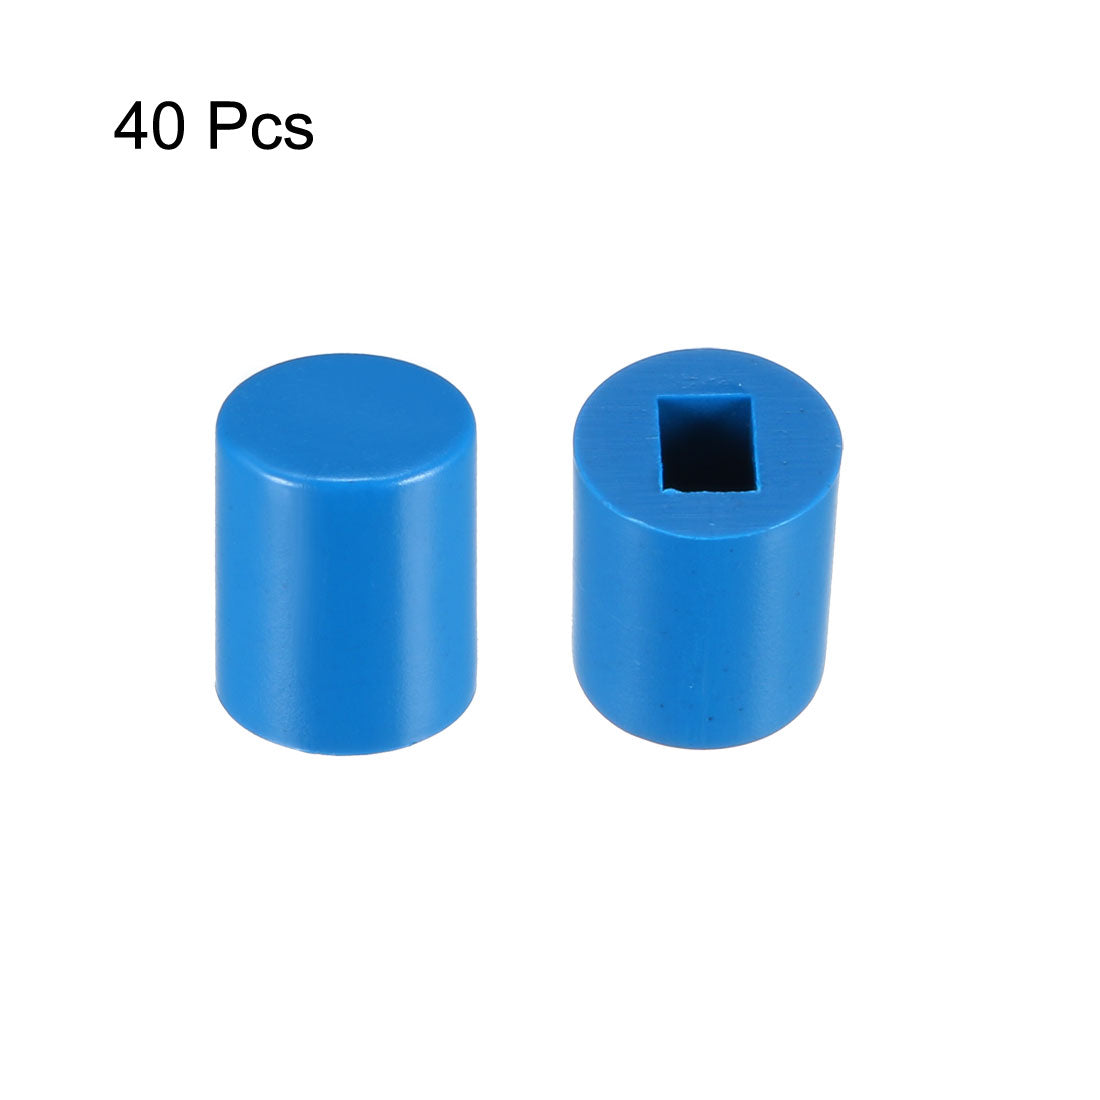 uxcell Uxcell 40Pcs Plastic 6x7mm Latching Pushbutton Tactile Switch Caps Cover Keycaps Protector Blue